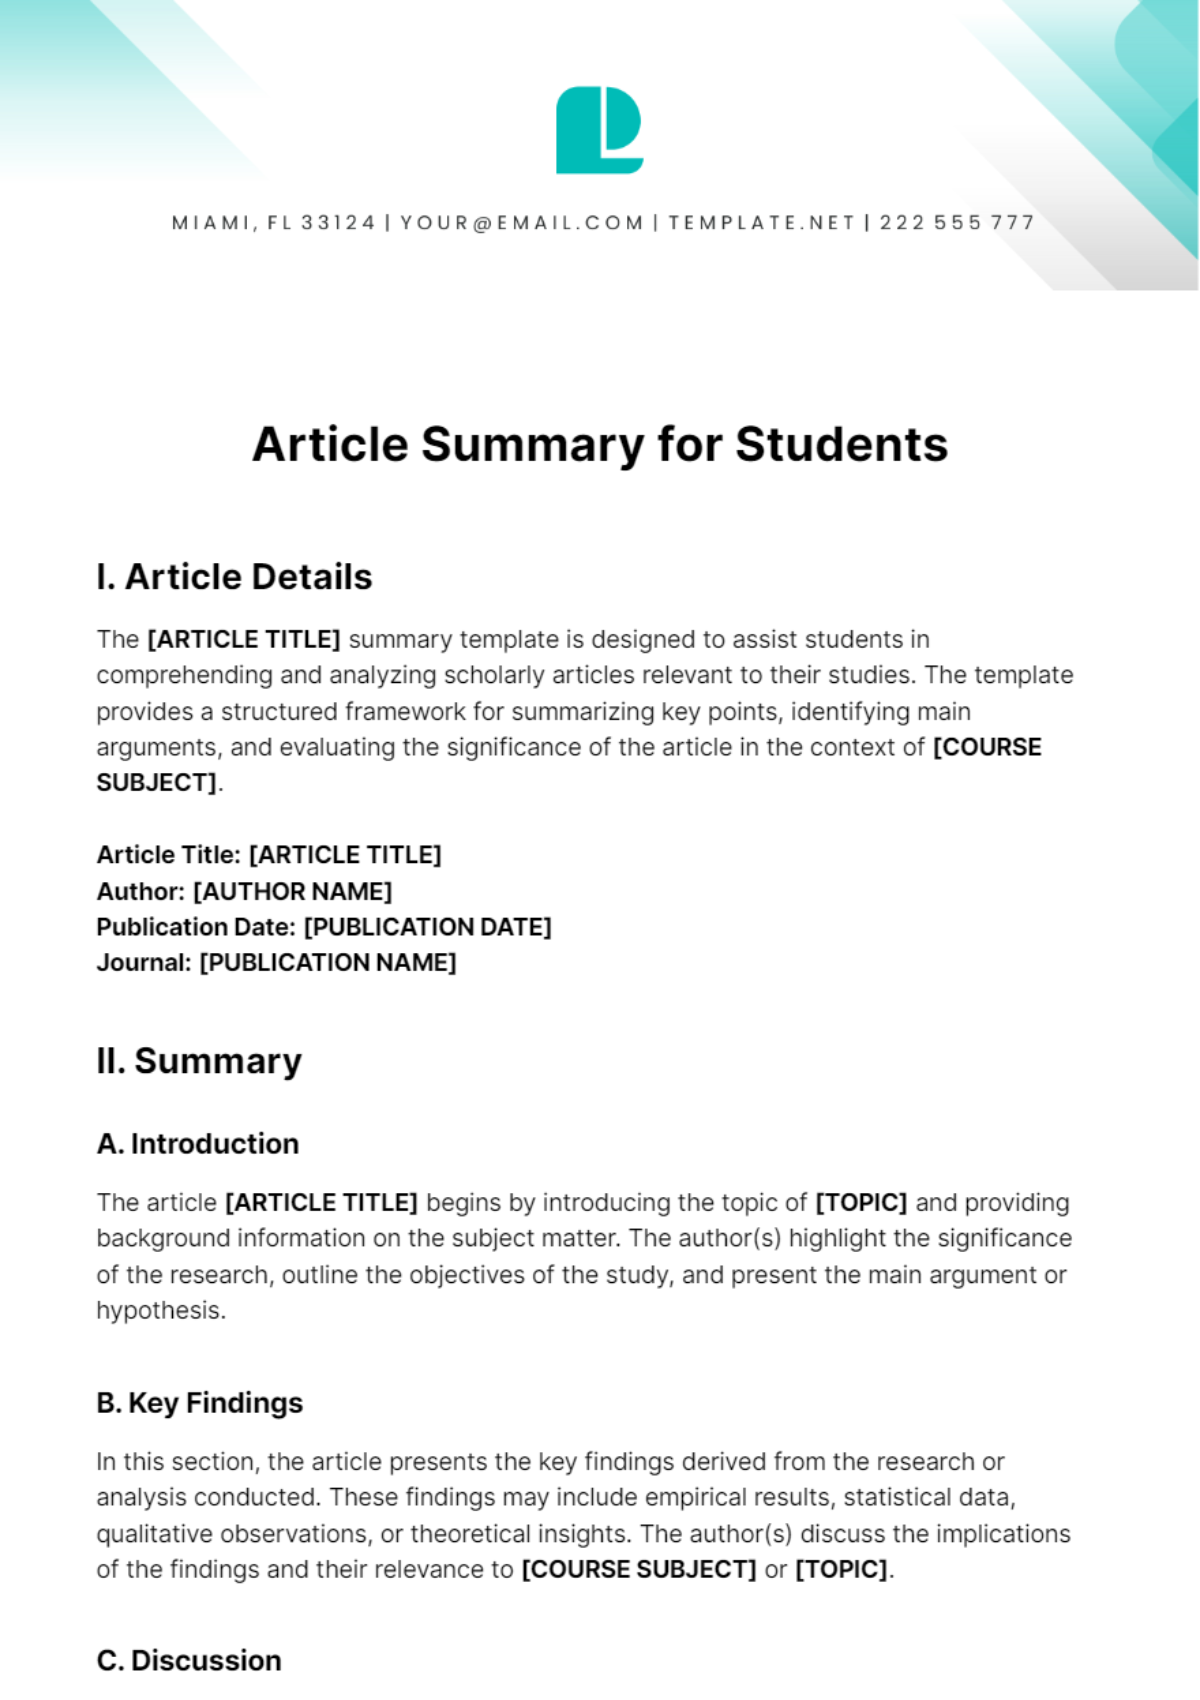 Article Summary for Students Template